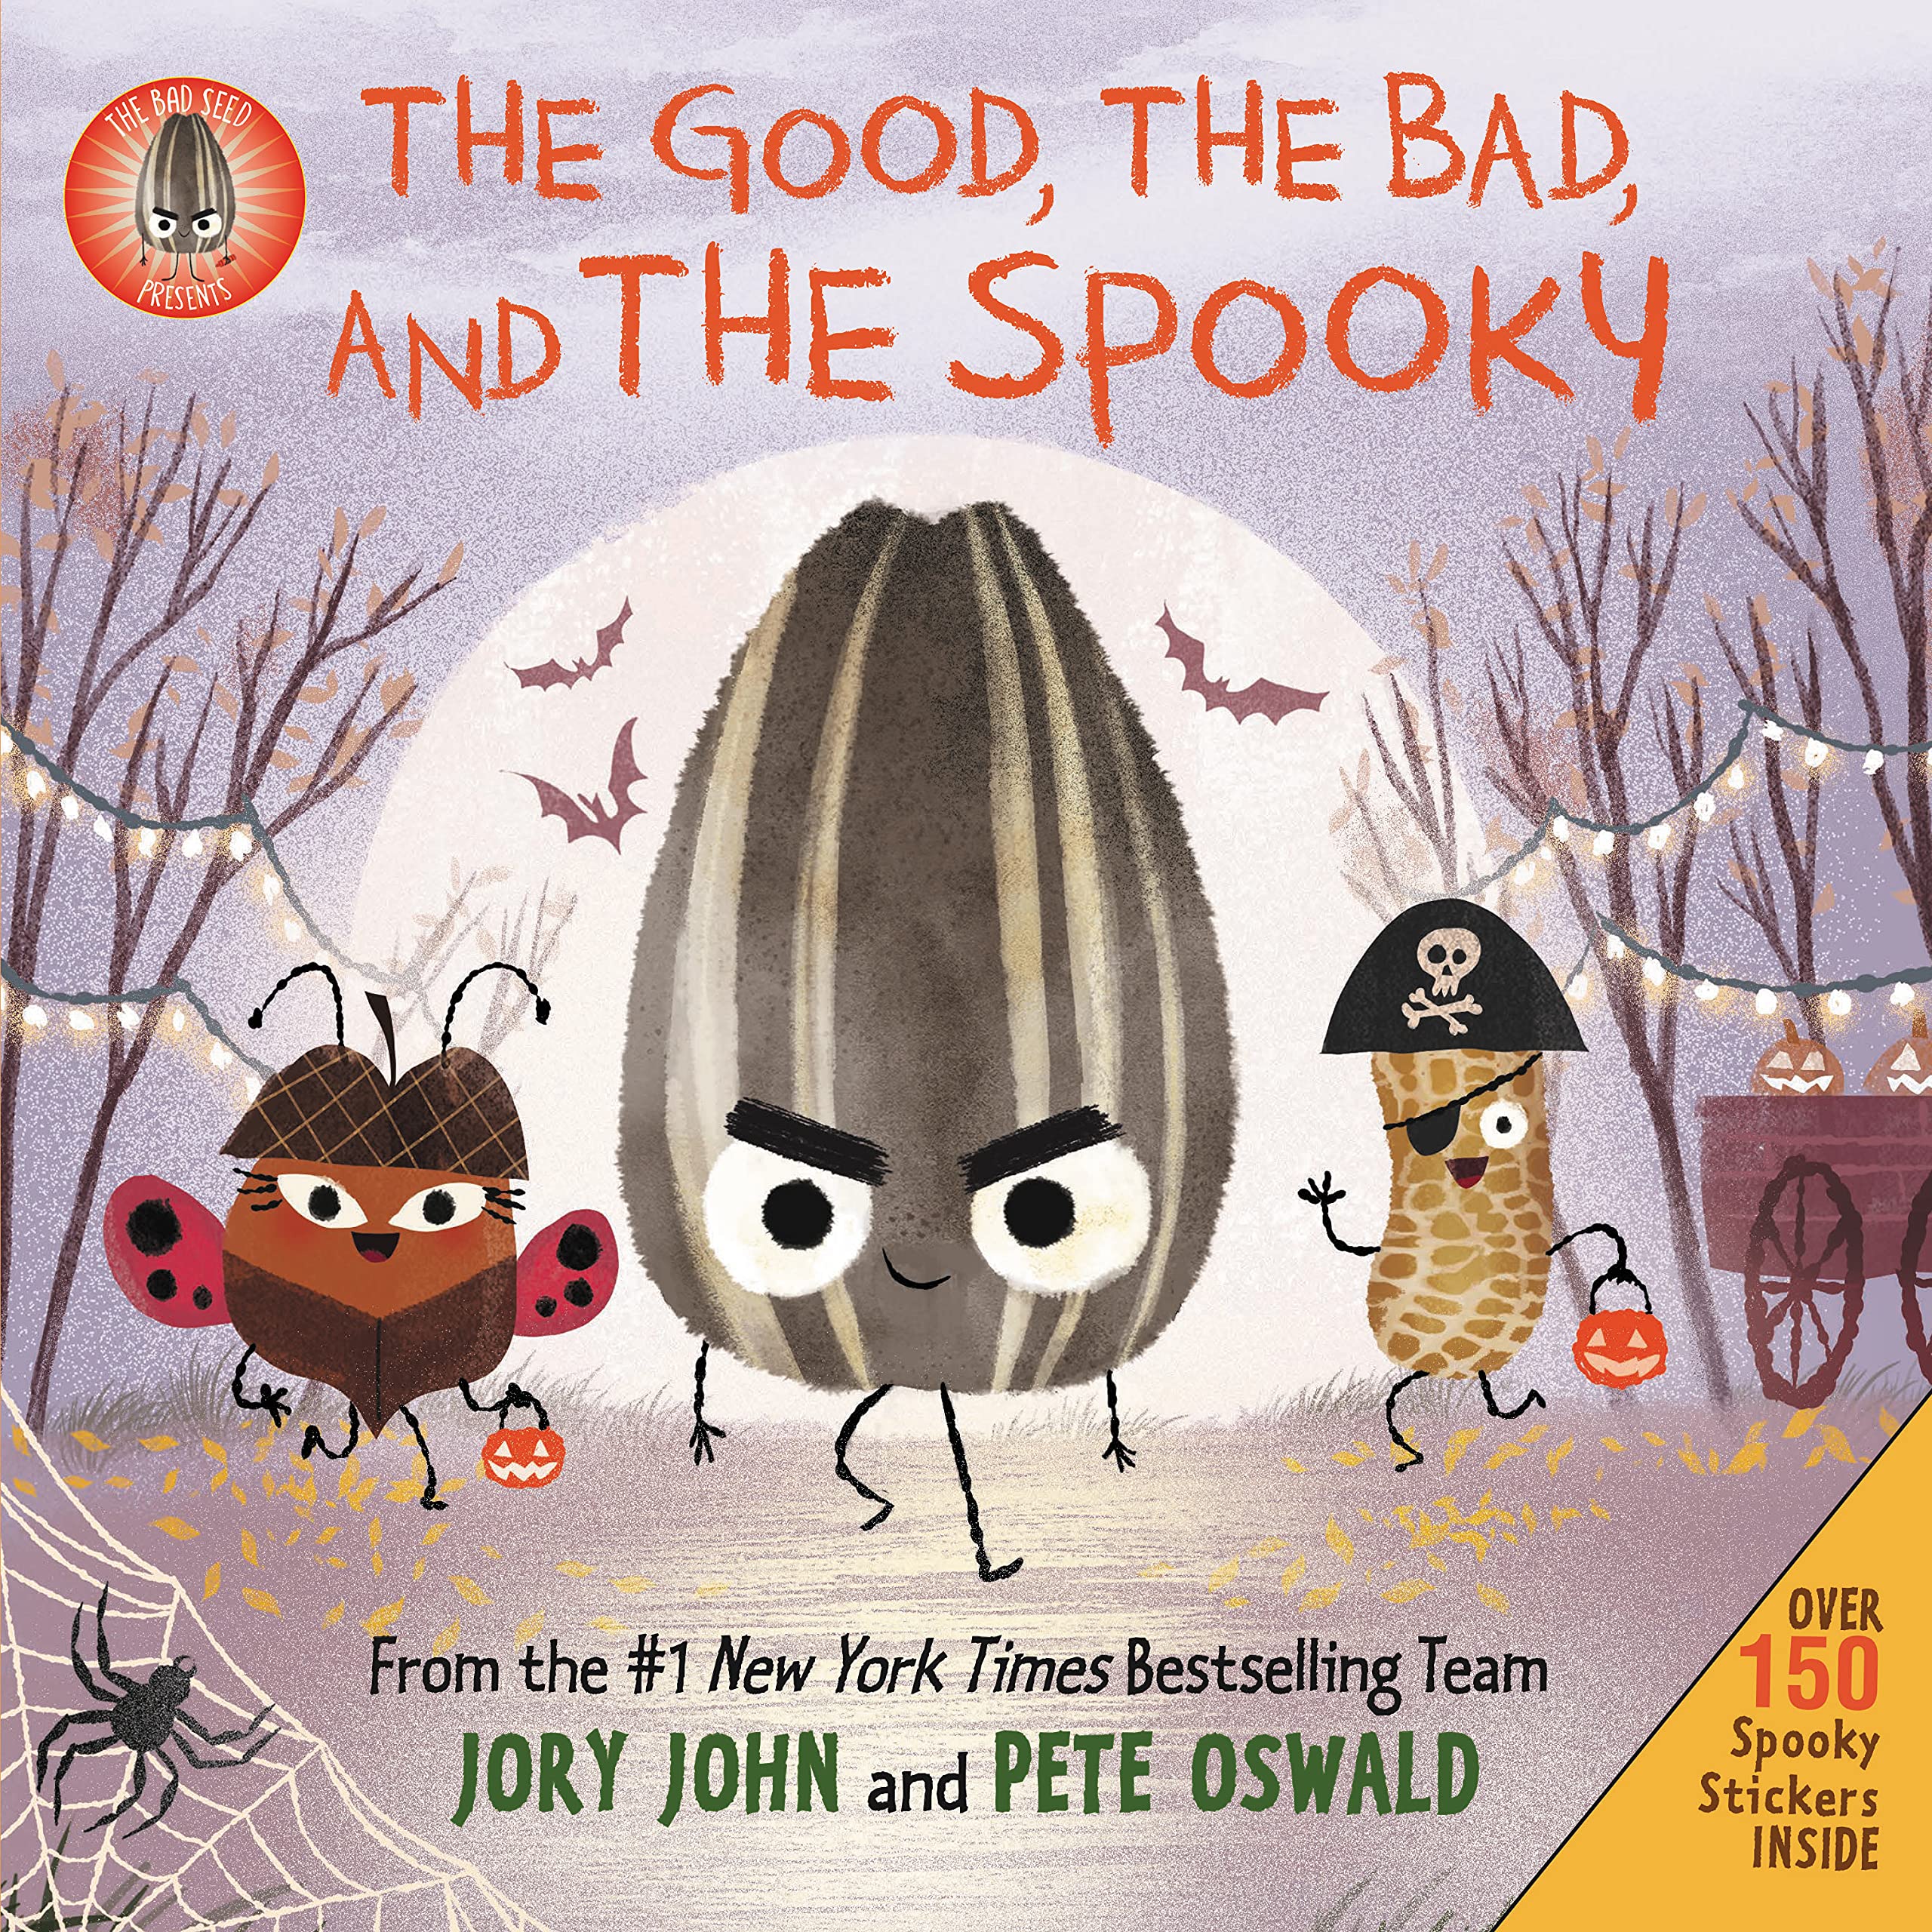 The Bad Seed Presents: The Good, the Bad, and the Spooky: Over 150 Spooky Stickers Inside [With Two Sticker Sheets] (Hardcover)